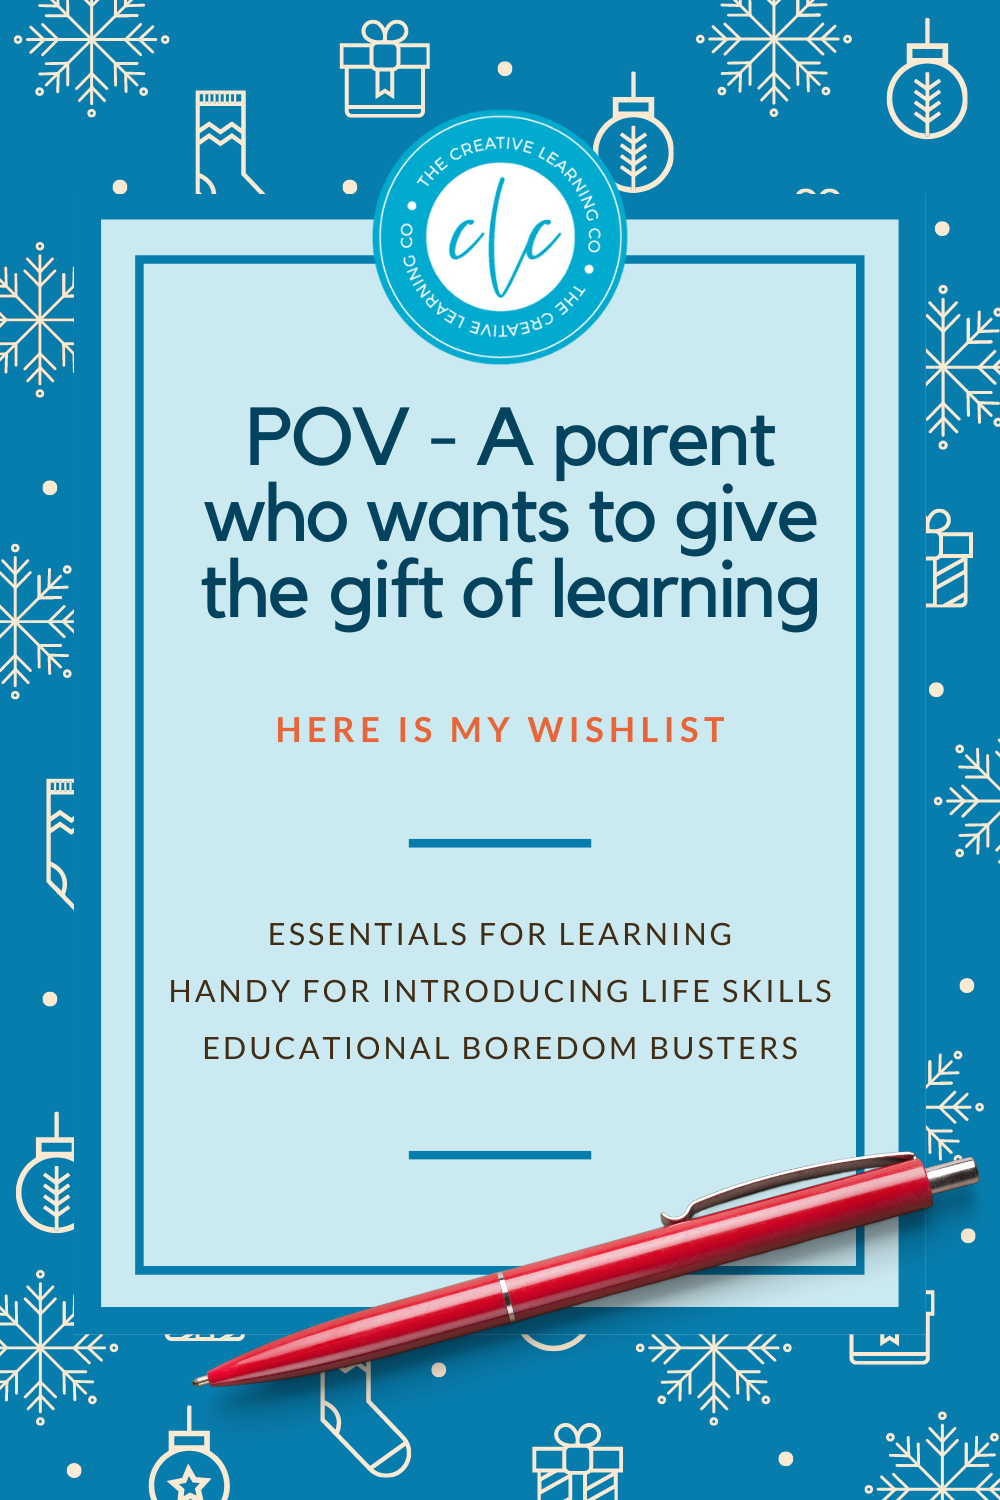 [WISHLIST] POV - A parent who wants to give the gift of learning